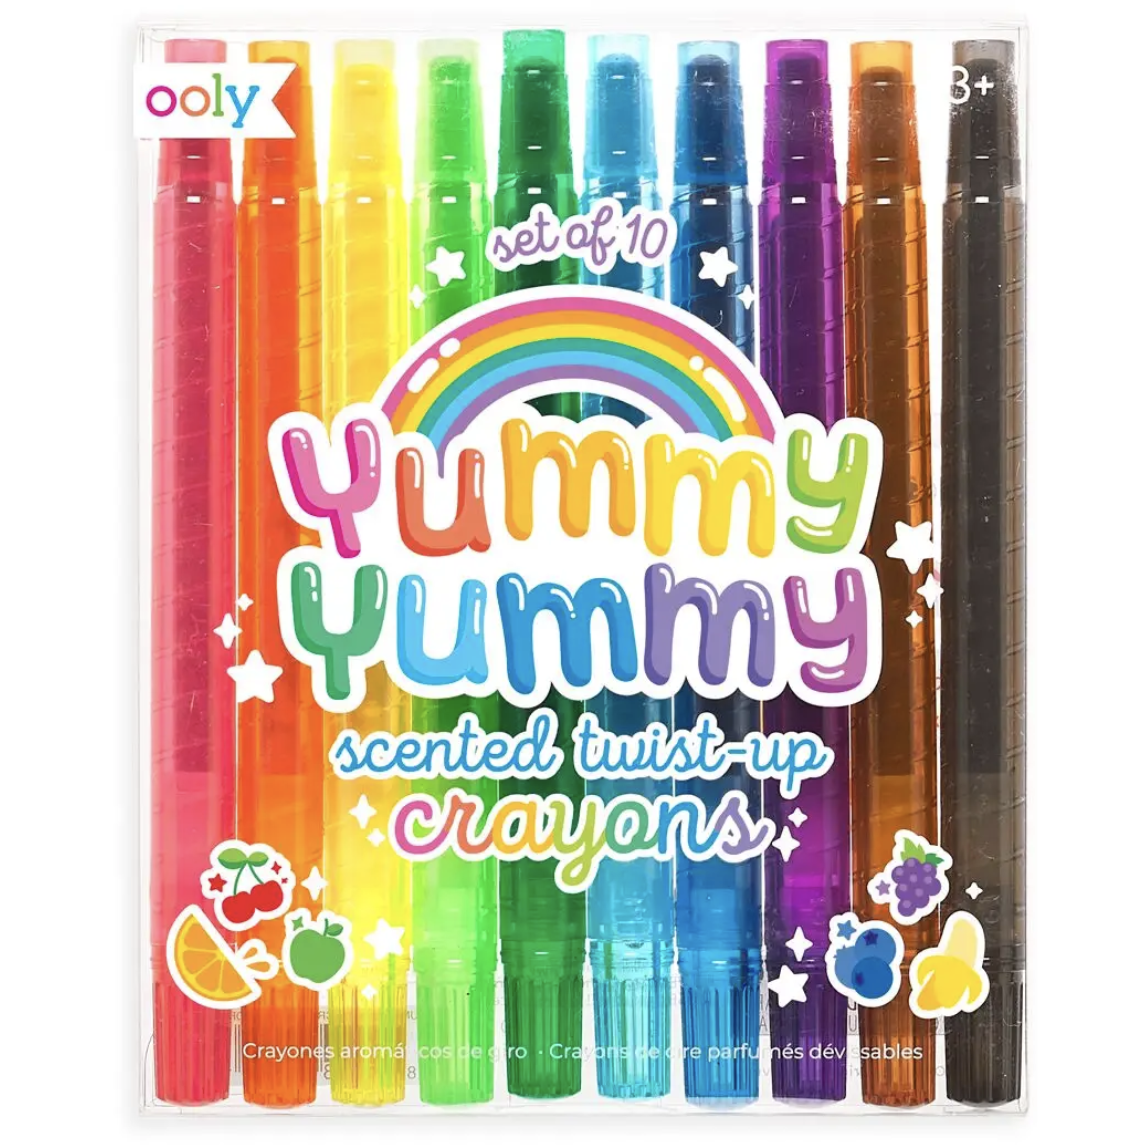 Yummy Yummy Scented Twist Up Crayons by Ooly